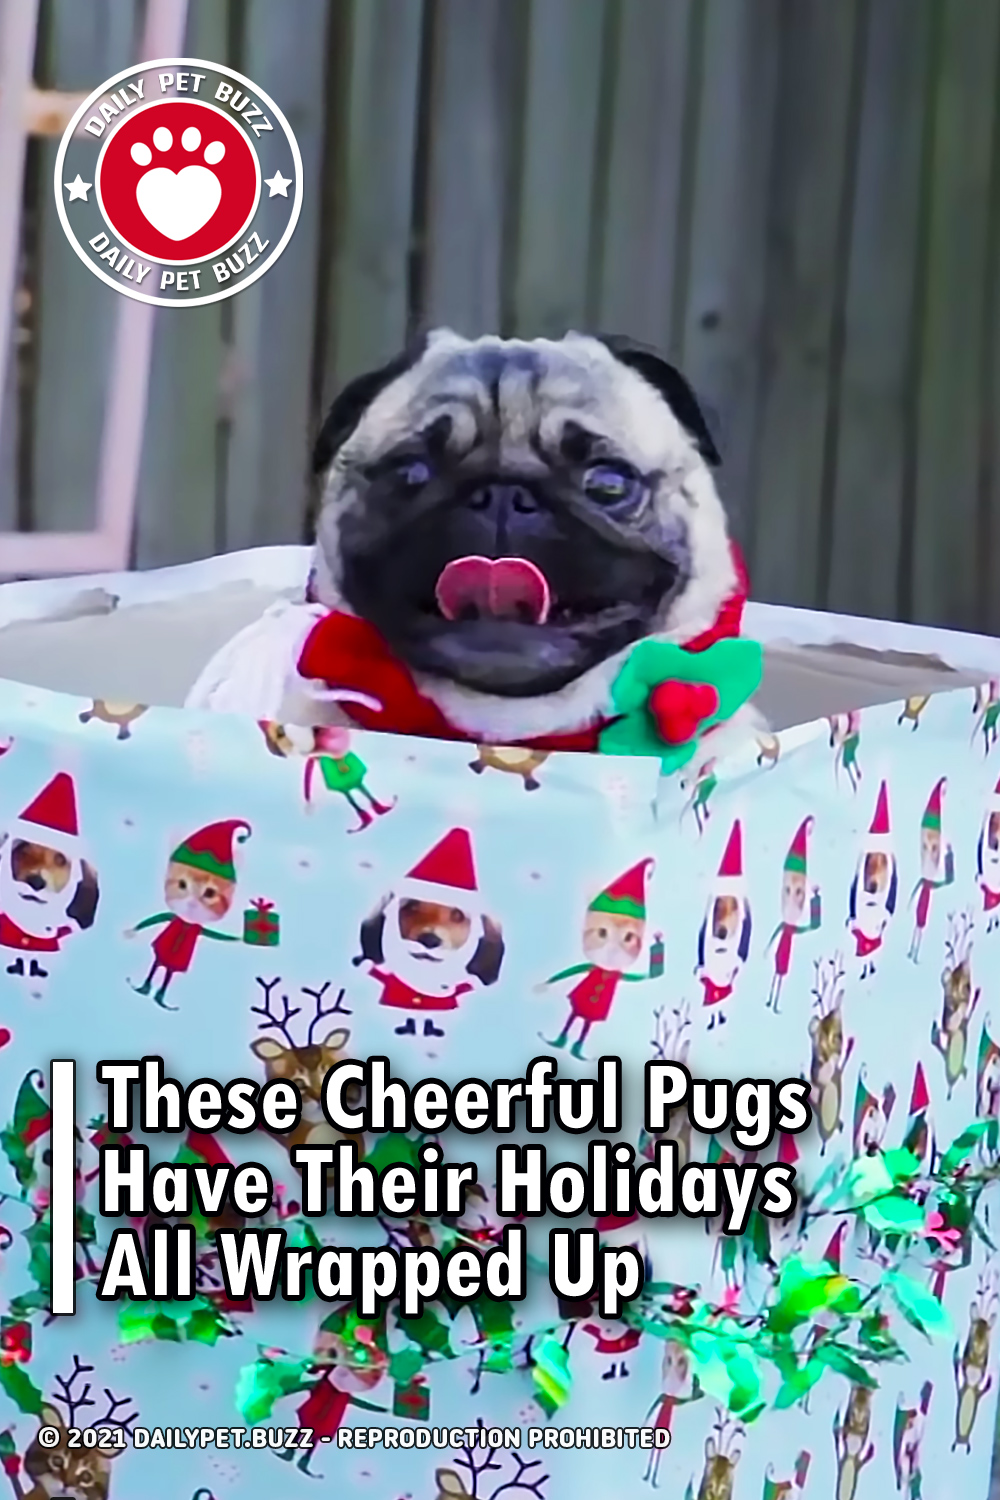 These Cheerful Pugs Have Their Holidays All Wrapped Up